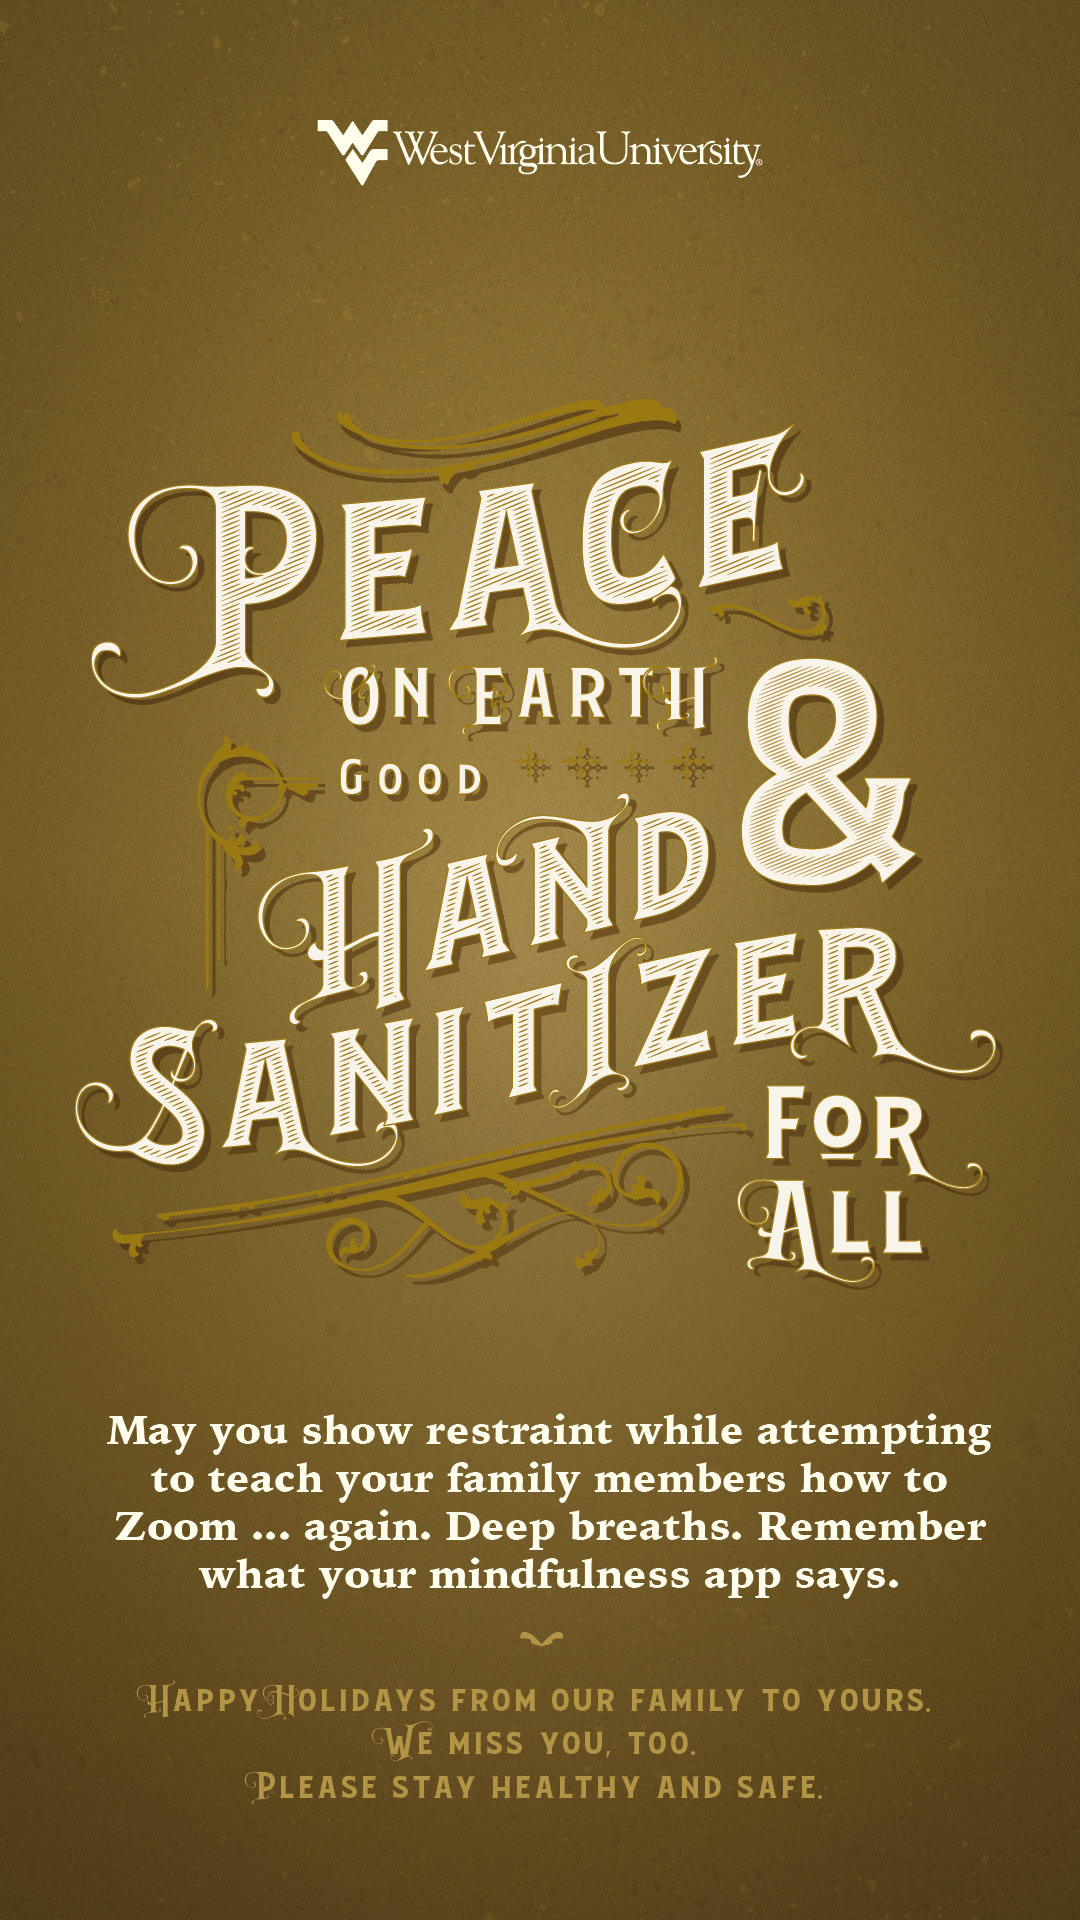 Peace on Earth & Good Hand Sanitizer for All poster. Poster content below image.